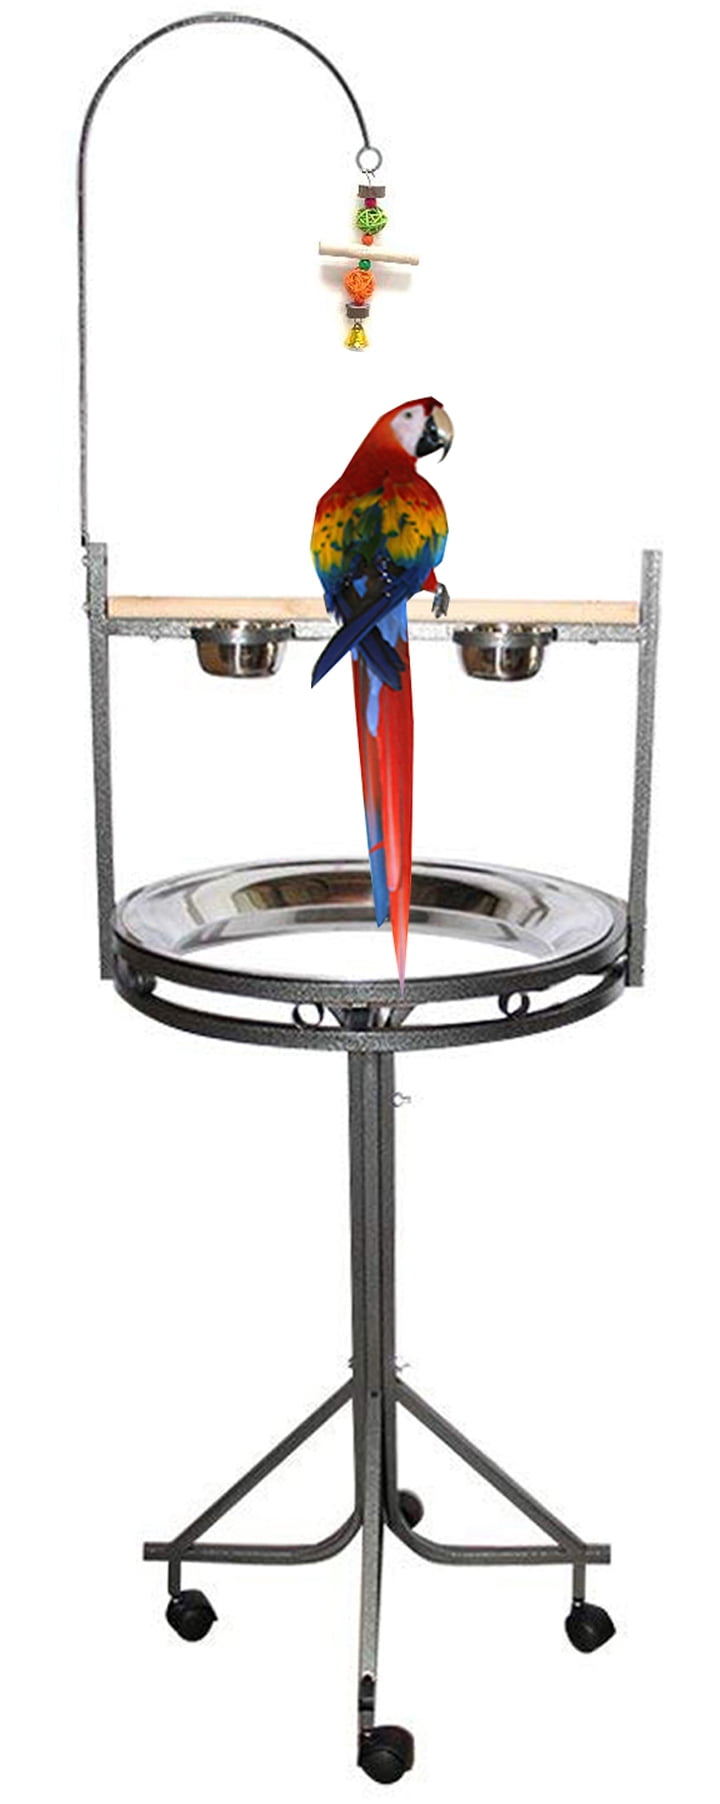 White PawHut Bird Play Stand Portable Bird Playground with Wood Perch Stainless Steel Feeding Cups Drop Tray for Parrots 